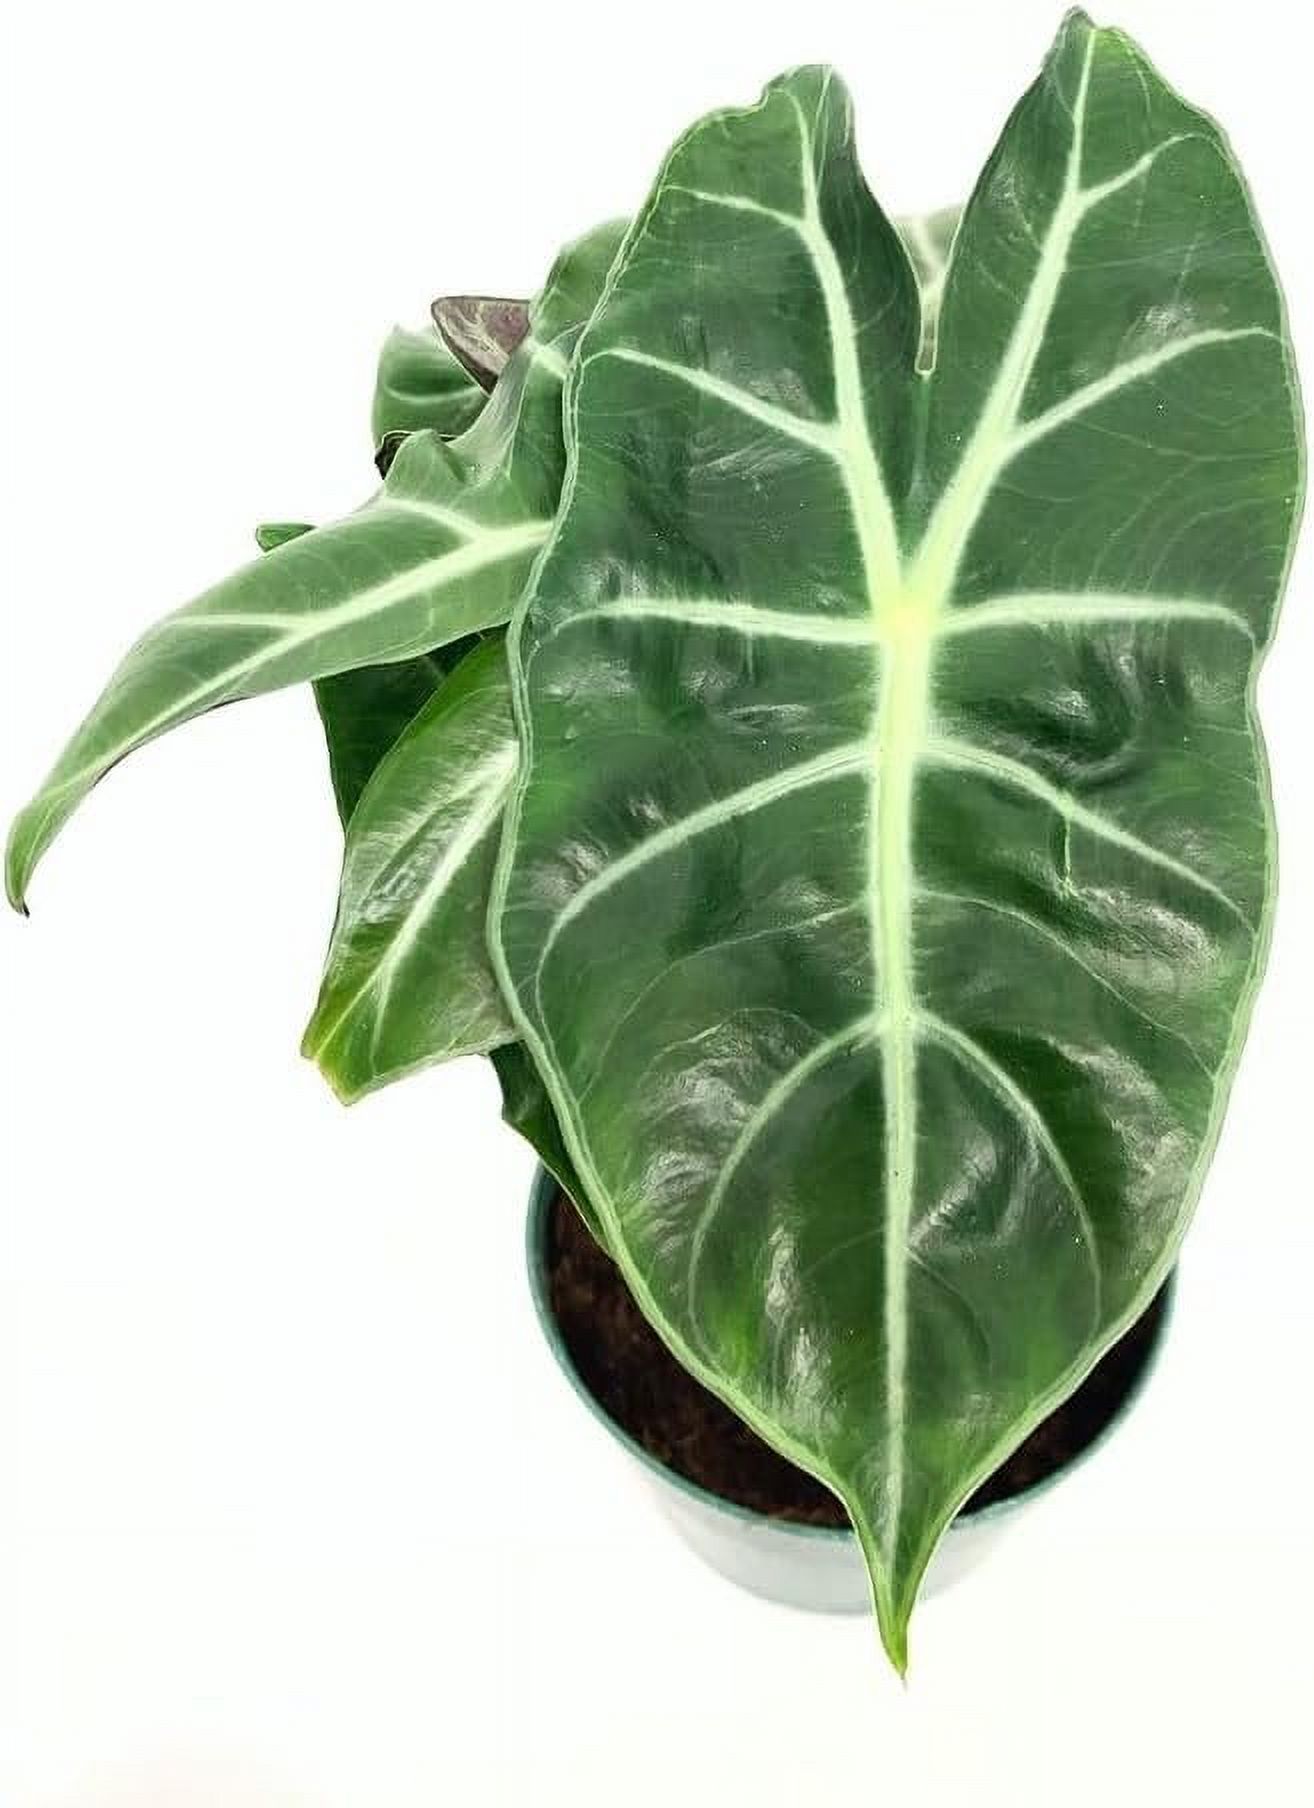 Morroco Alocasia - Live Plant in a 4 Inch Pot - Alocasia - Florist Quality Air Purifying Indoor Plant - Nature's Masterpiece in Your Home - image 1 of 5